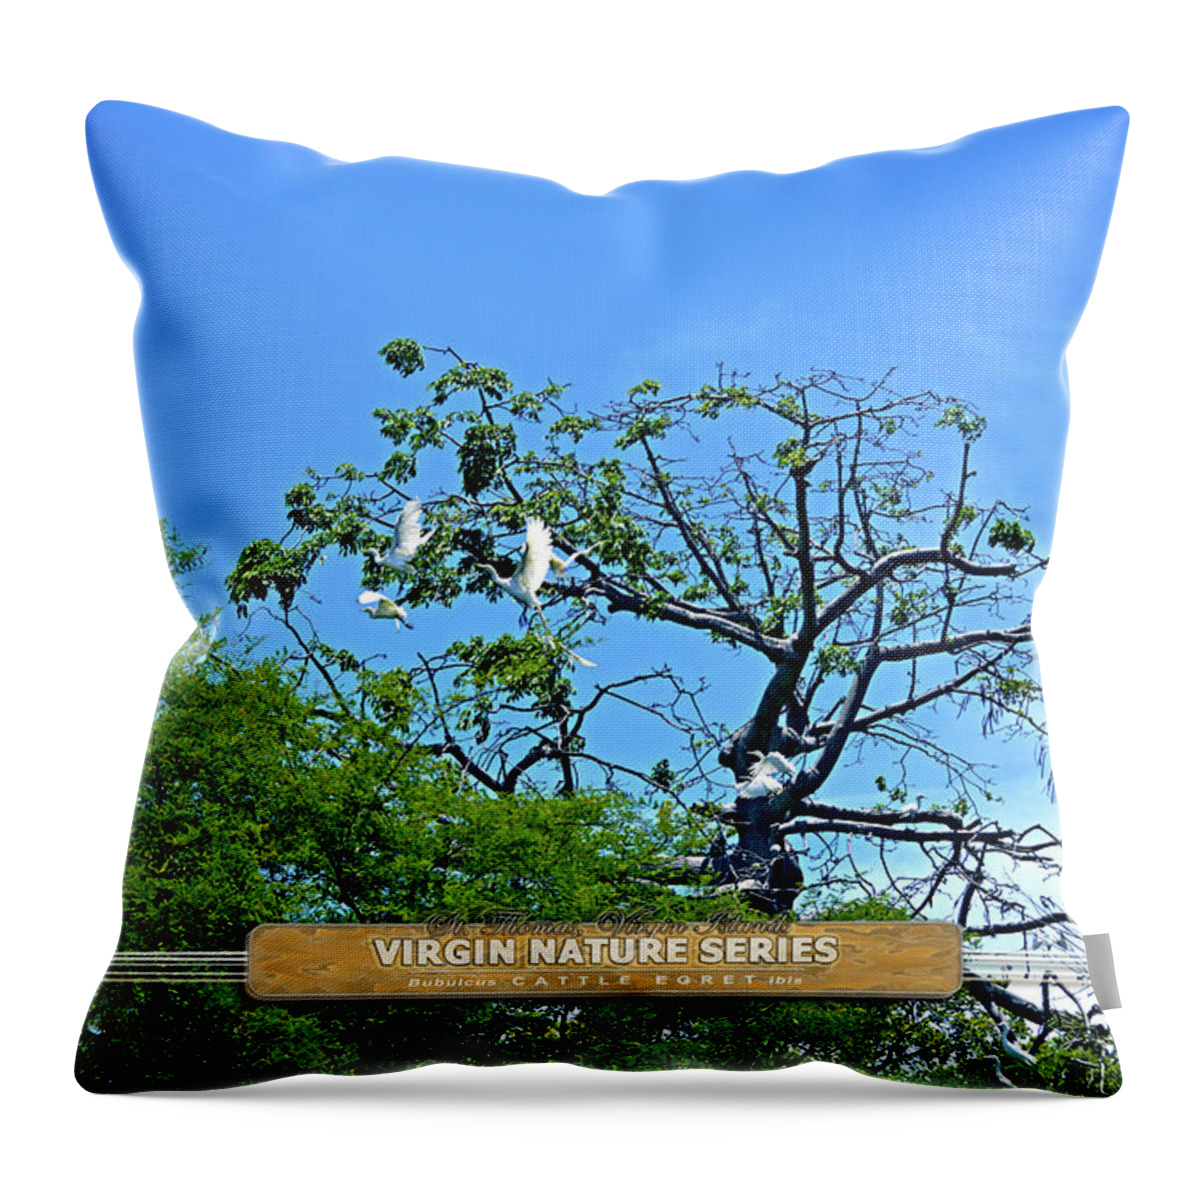 Cattle Egret Throw Pillow featuring the photograph Ibis Risen - Virgin Nature Series by Climate Change VI - Sales